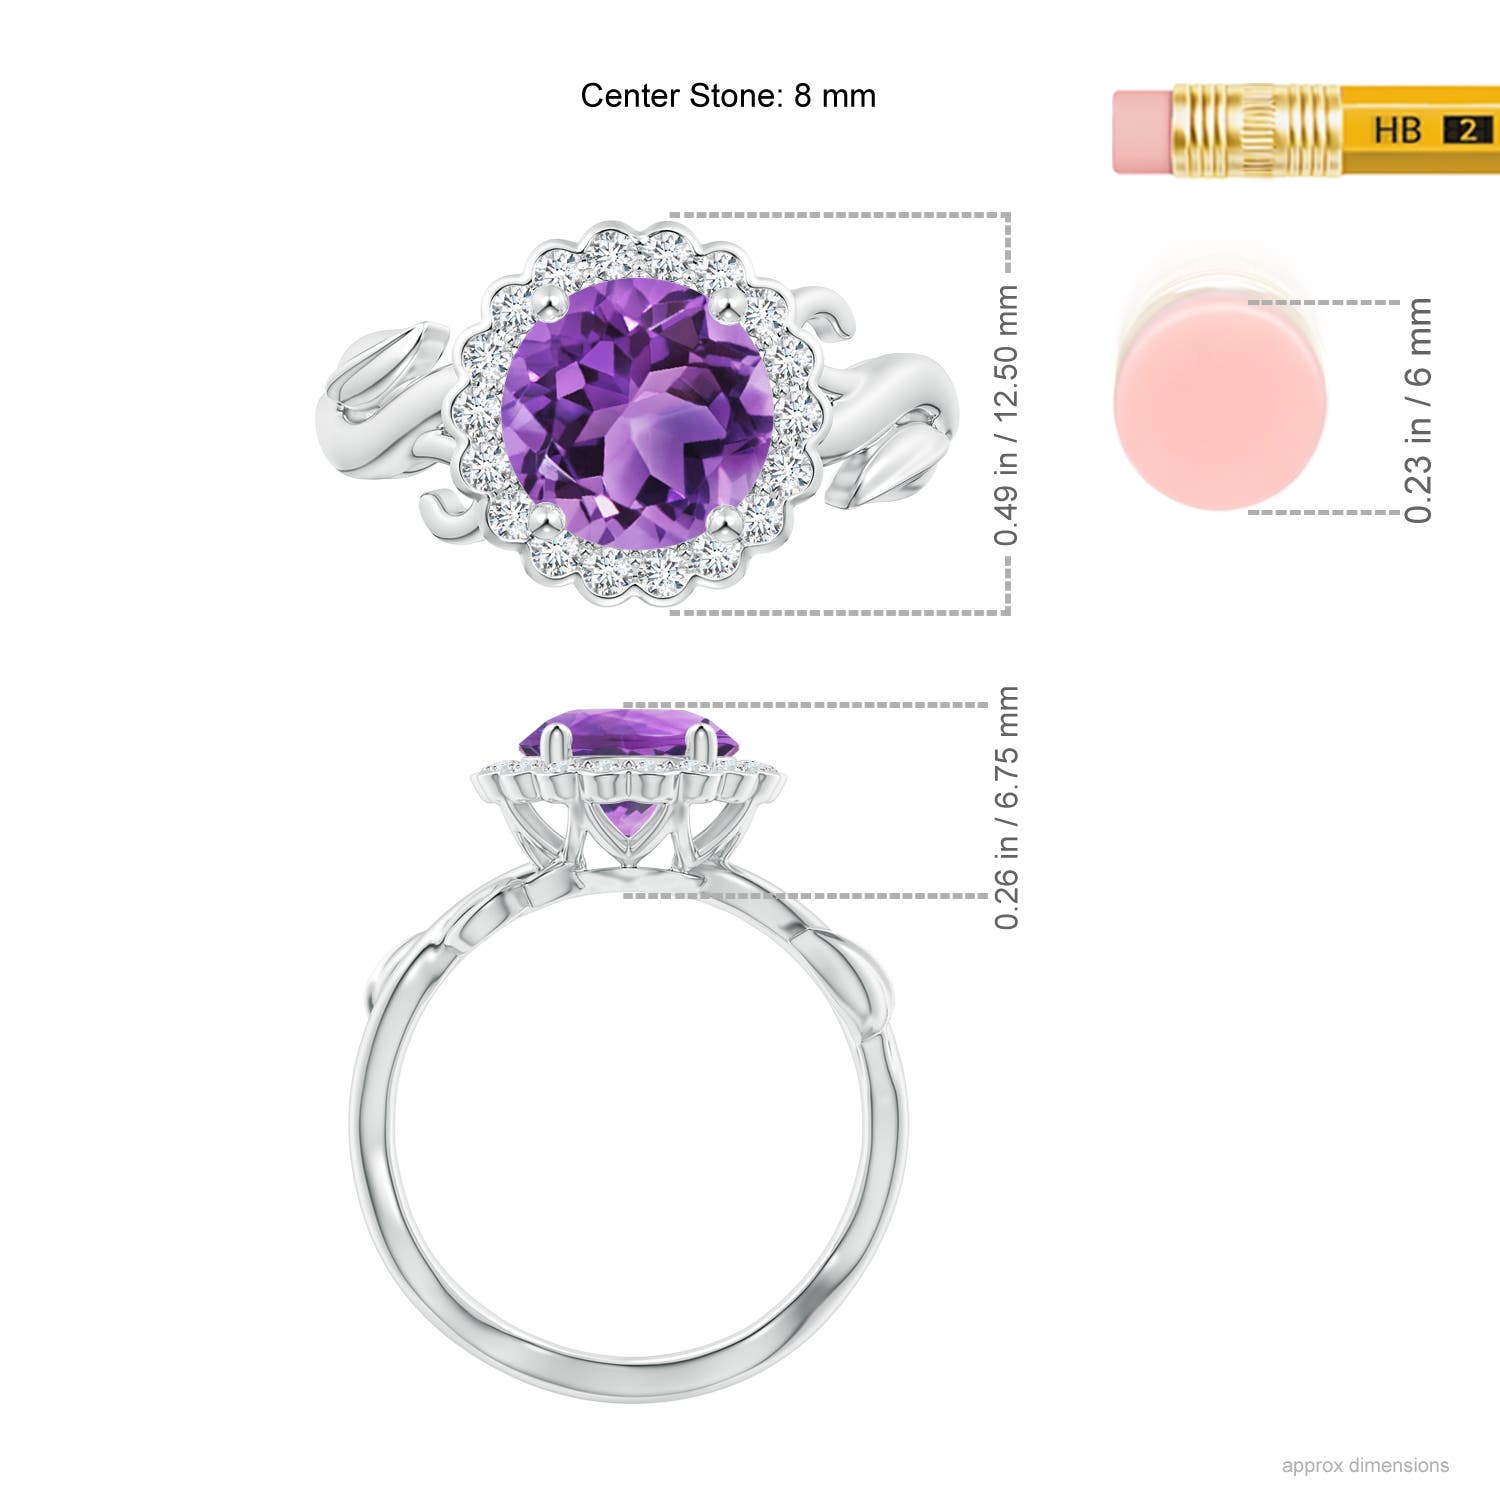 AA - Amethyst / 1.95 CT / 14 KT White Gold